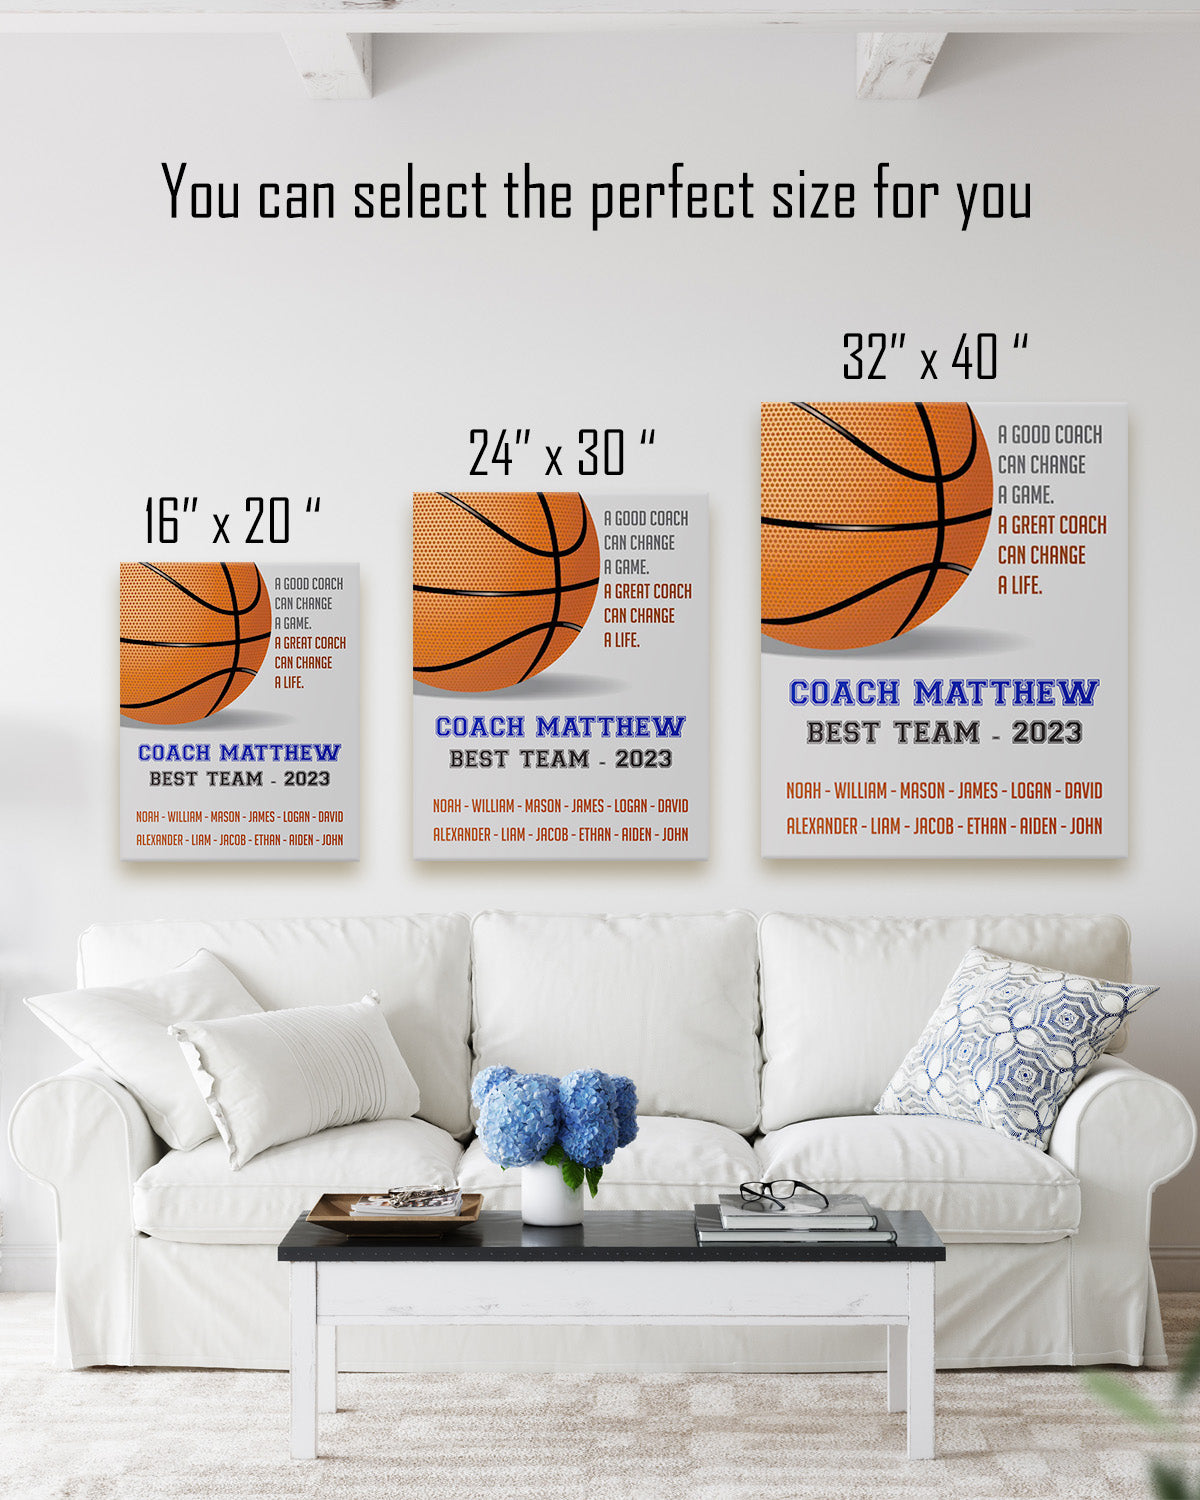 Basketball Coach Appreciation Gift - Customize With Athlete Names, Coach's Names, Team Name, Year or Season - Motivational Sports Wall Art - Coach's Quote